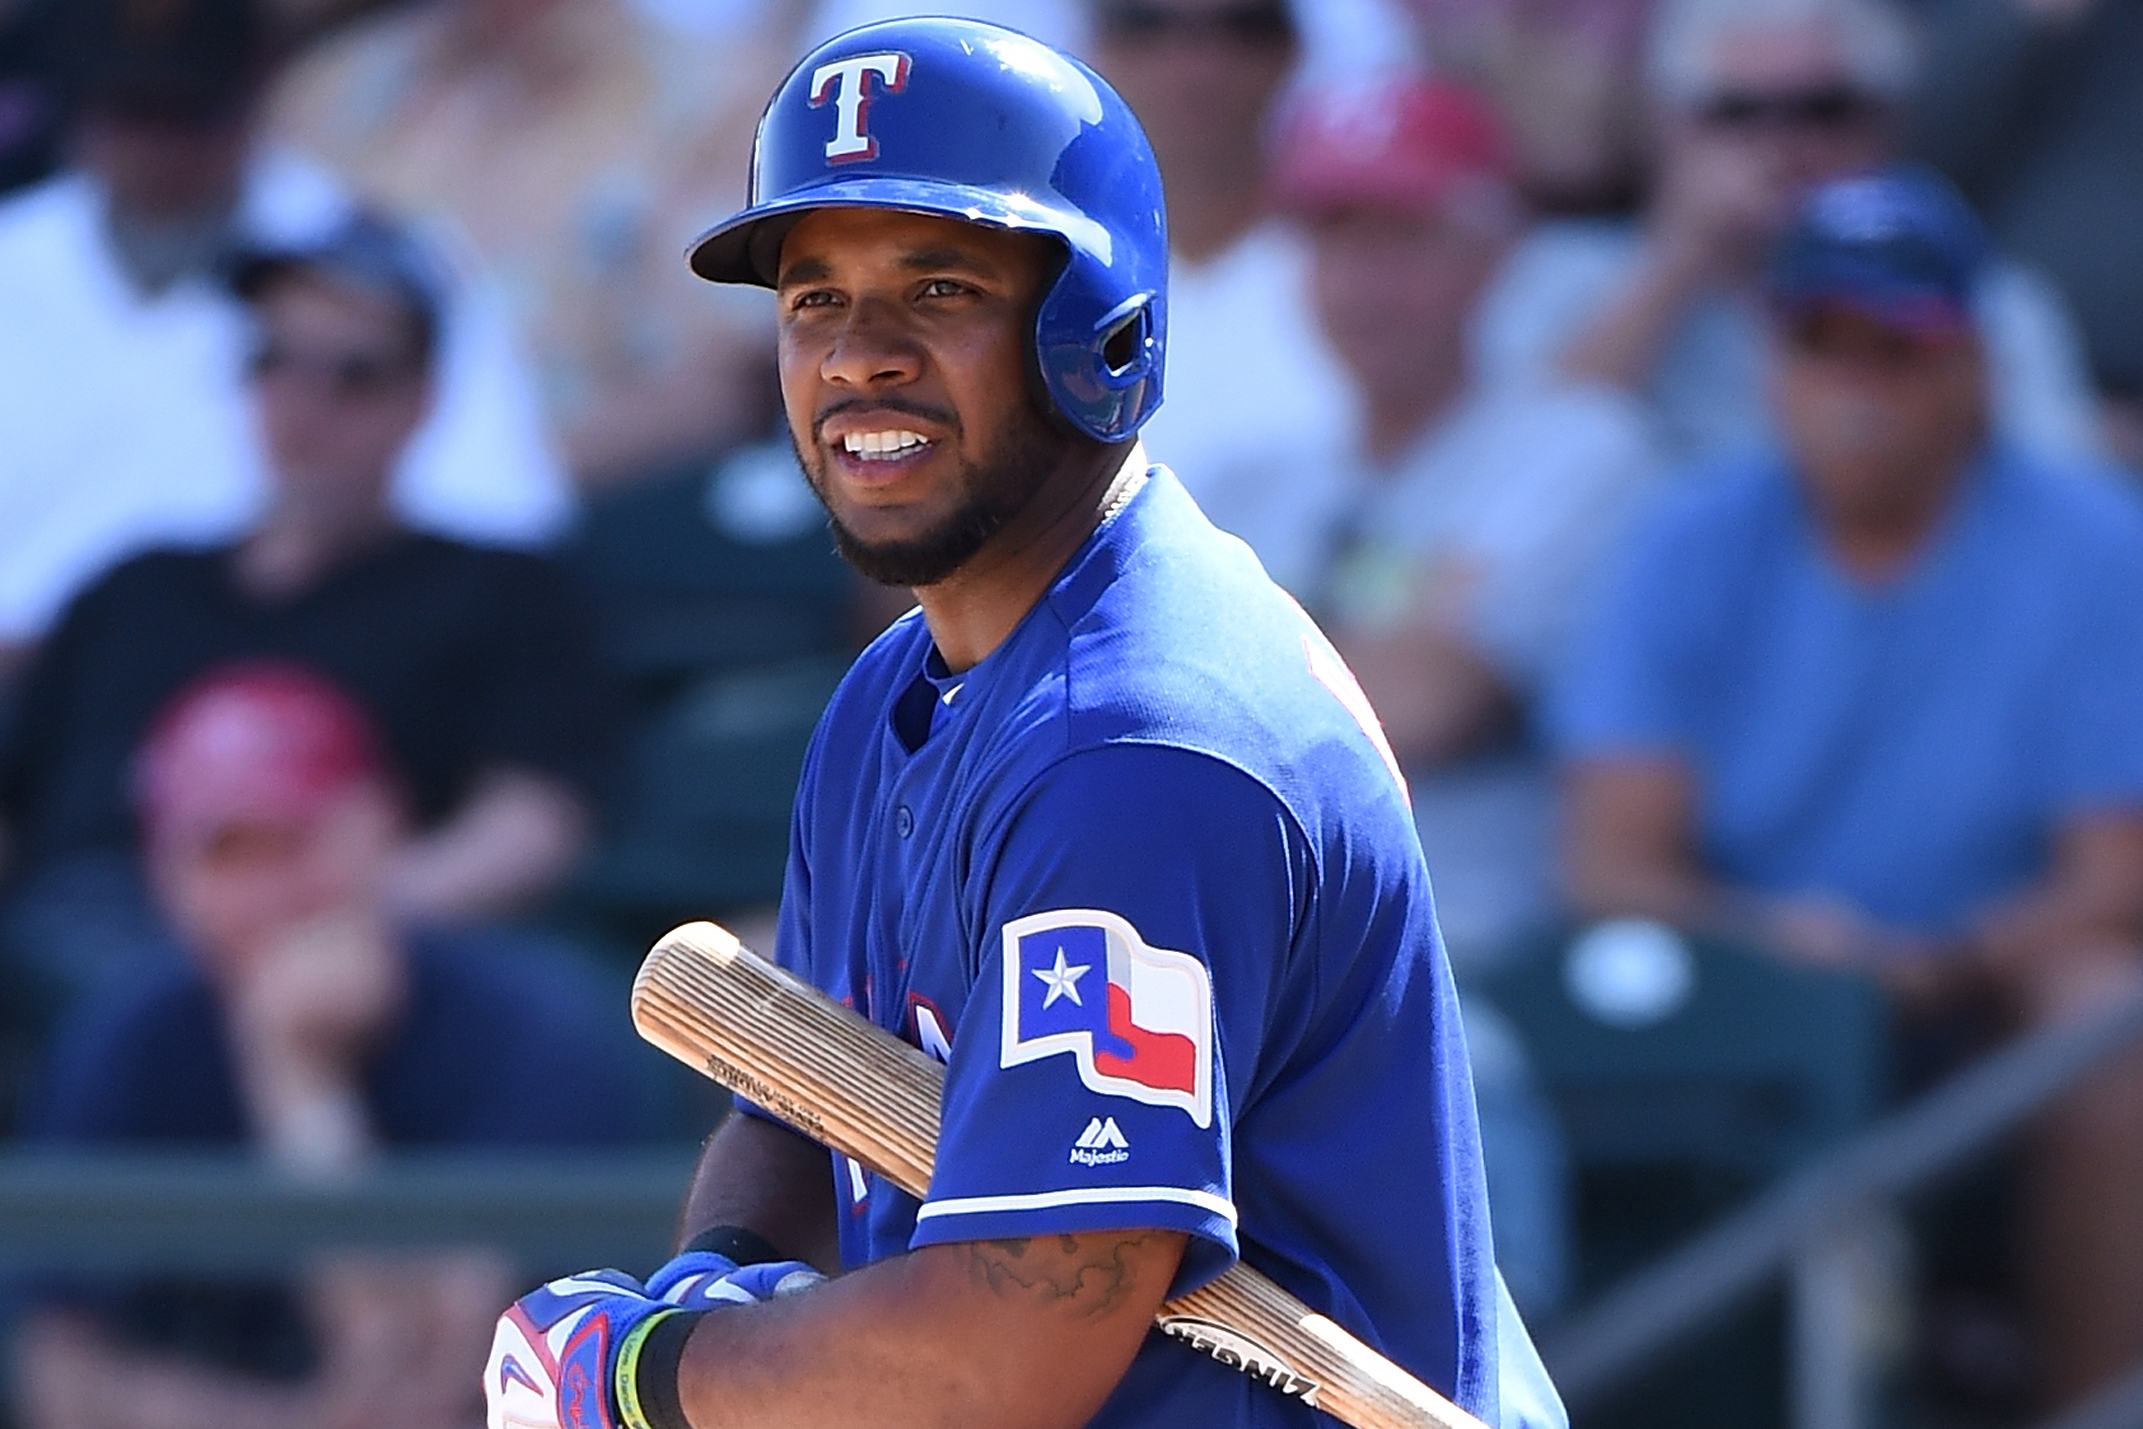 Veteran shortstop Elvis Andrus frustrated by playing time as Athletics seem  intent to avoid contractual option 